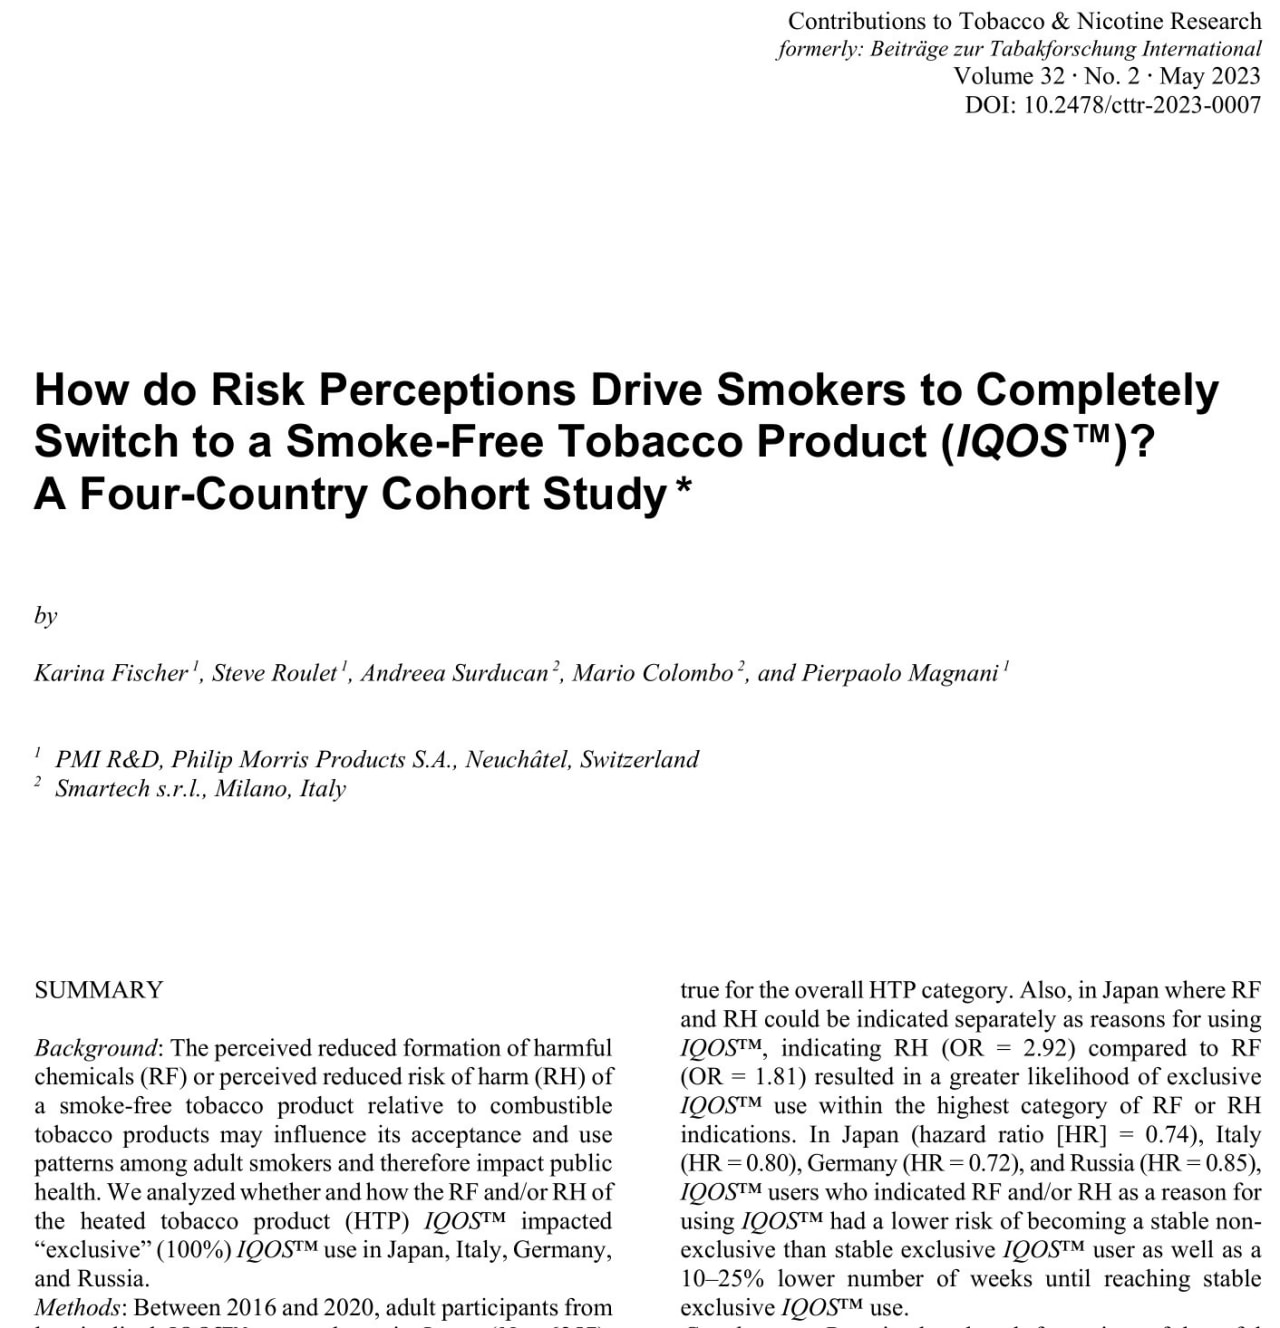 How do Risk Perceptions Drive Smokers to Completely Switch to a Smoke-Free Tobacco Product (IQOS™)? A Four-Country Cohort Study